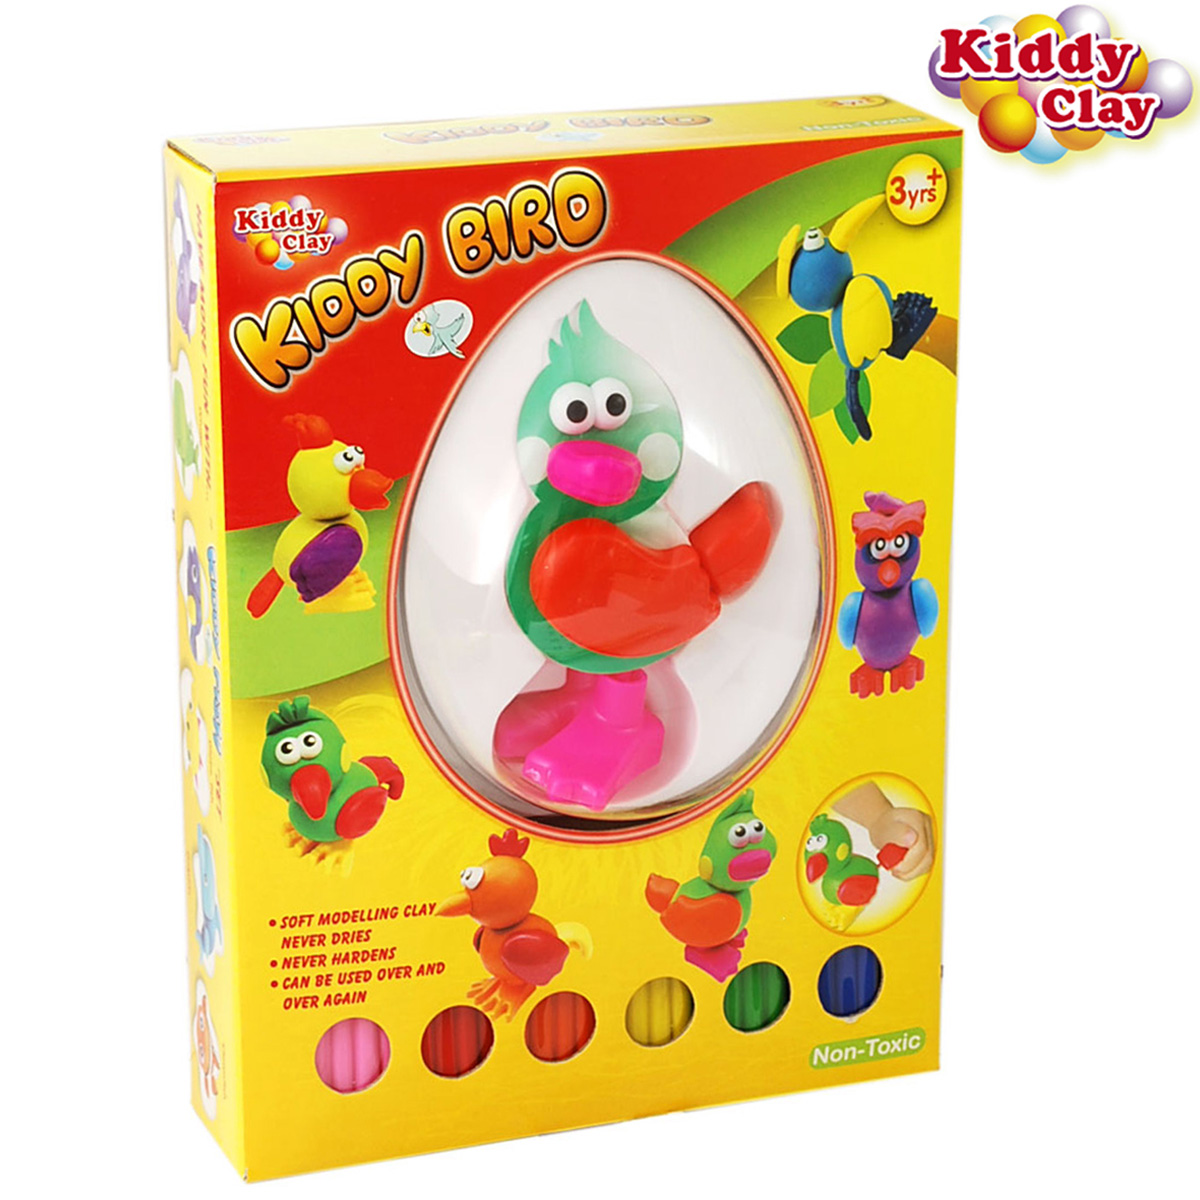 Kiddy Clay : 6 Colors of Clay + Bird Parts /Duck